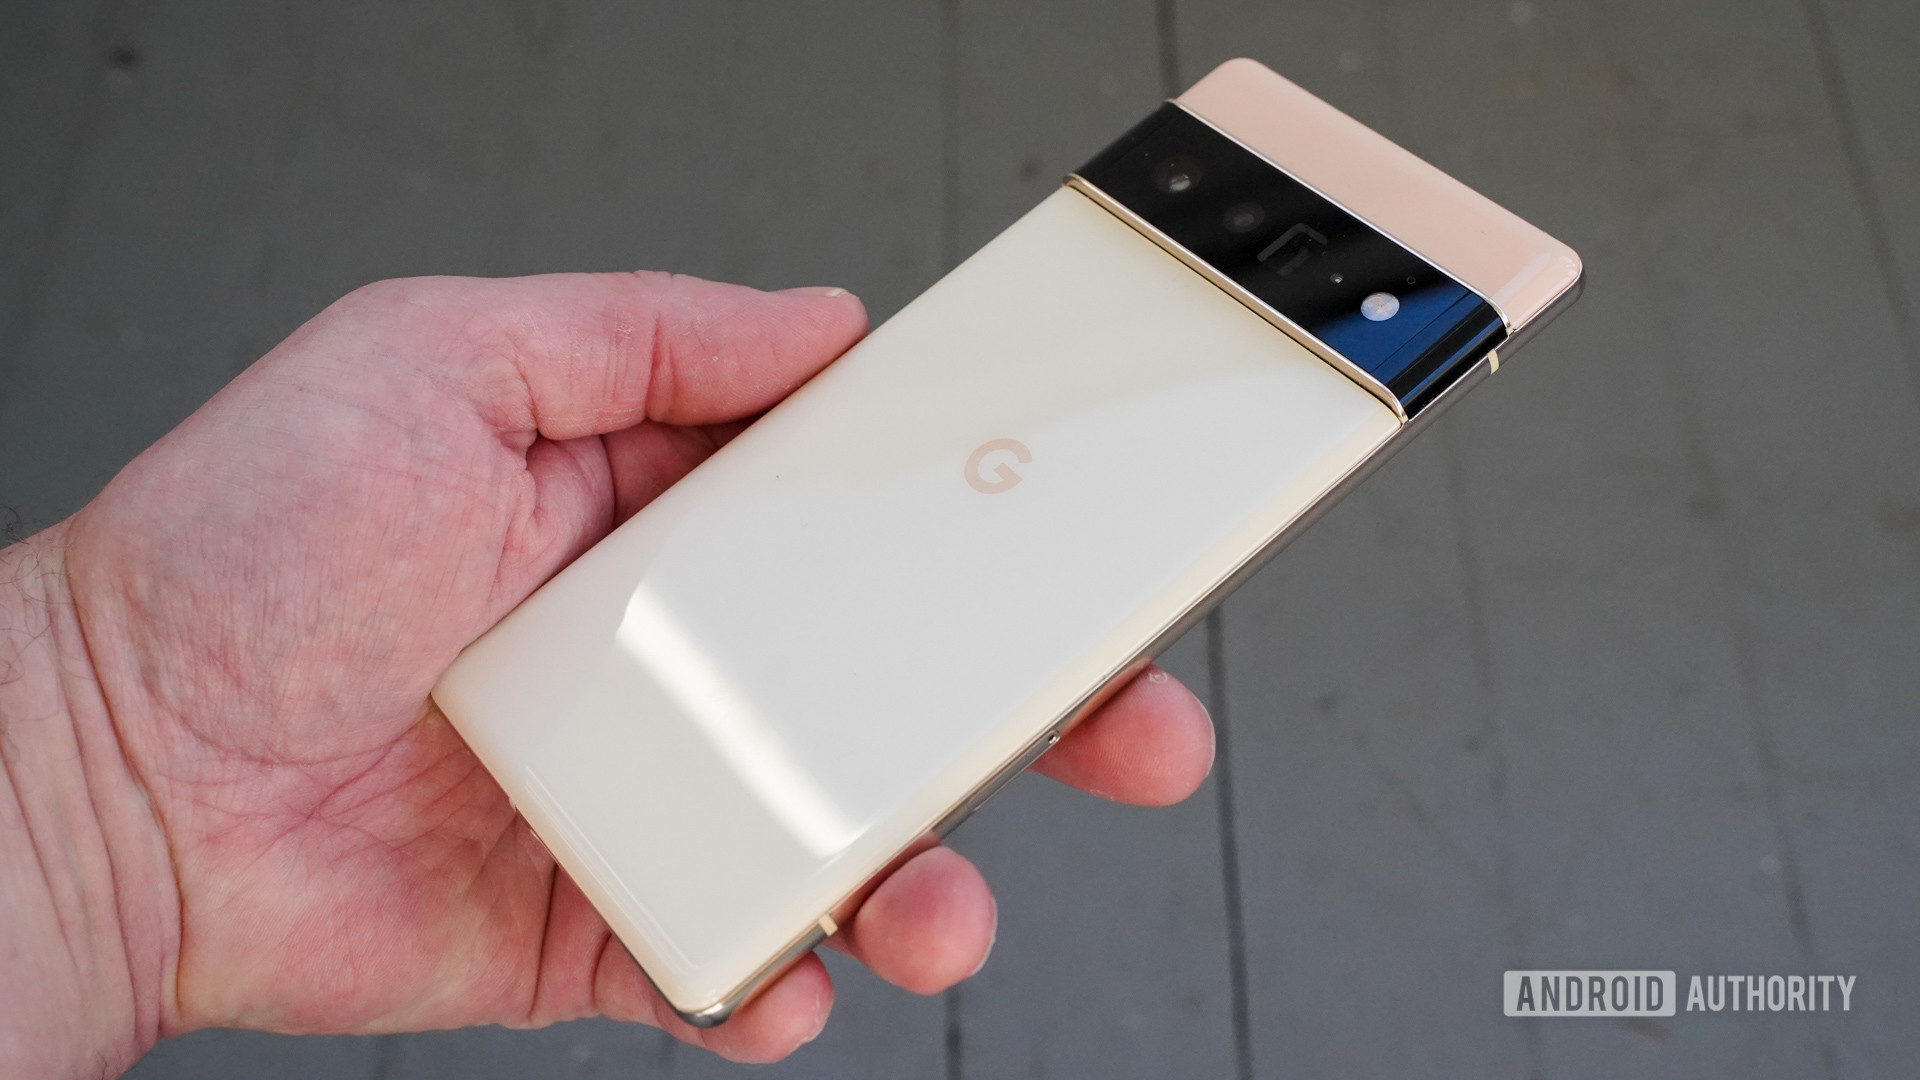 Google Pixel 6 Pro right angled view in the hand